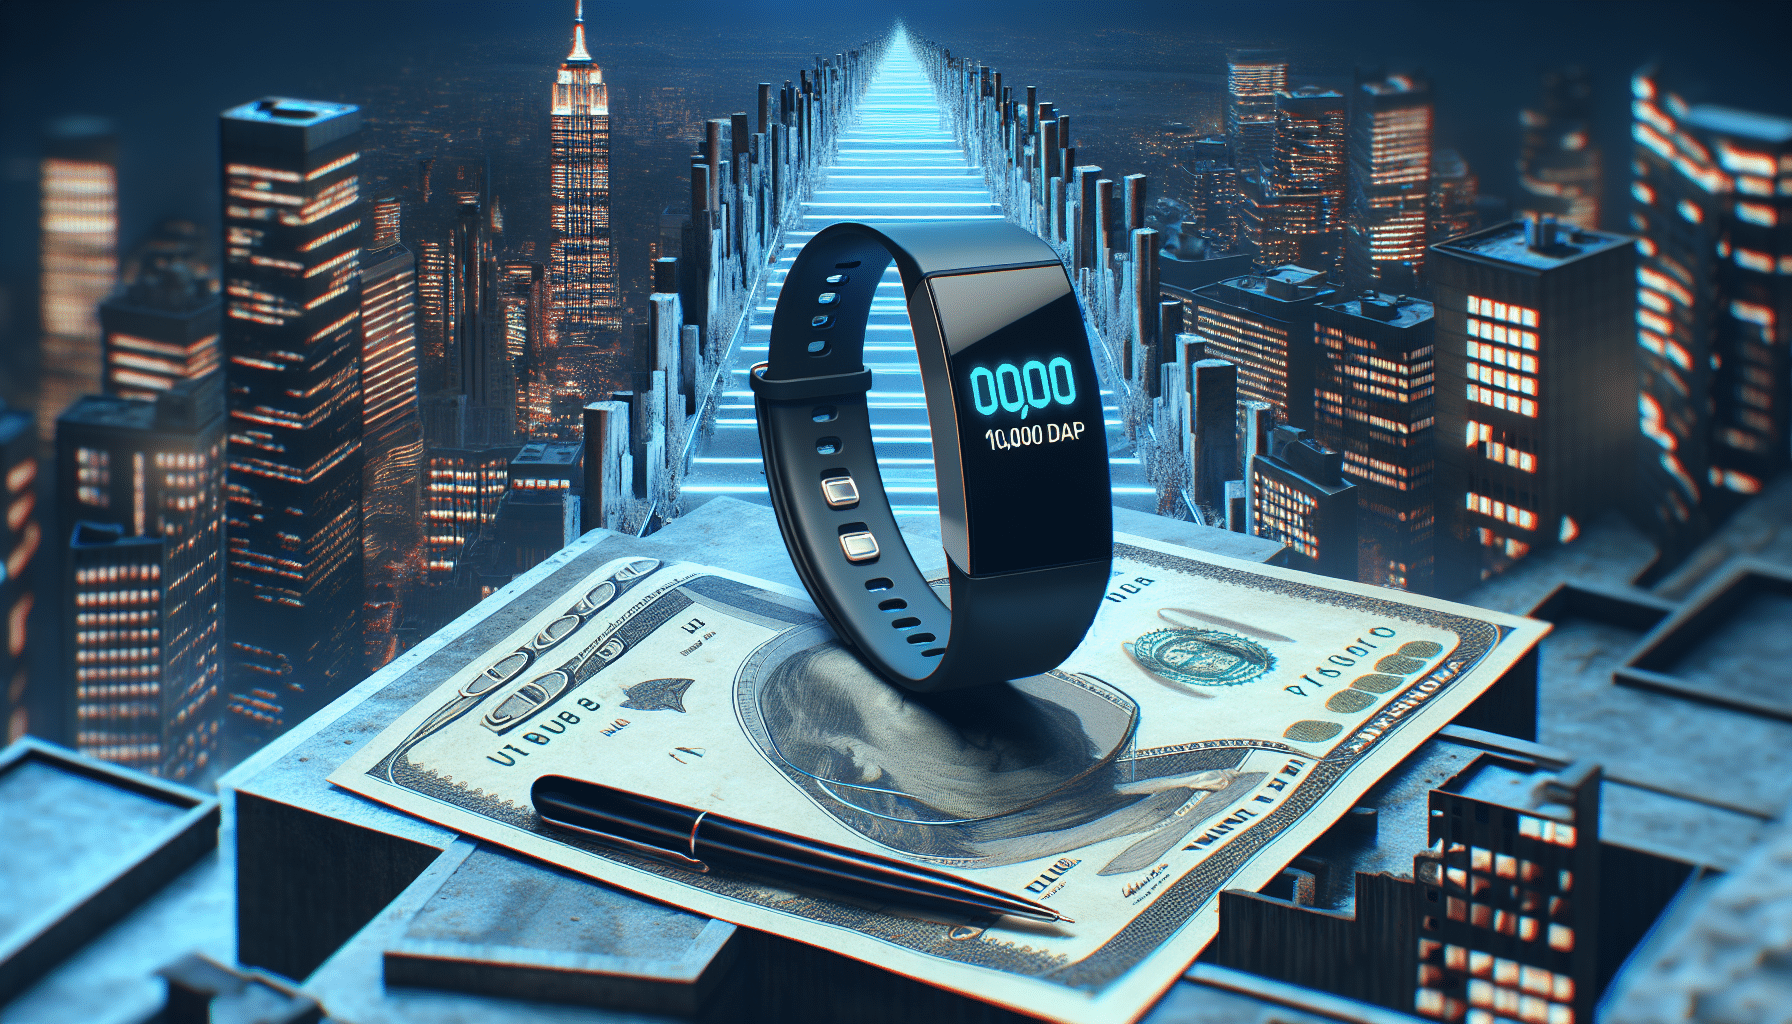 Dream Job: Get Paid $10,000 to Walk 10,000 Steps in a Day